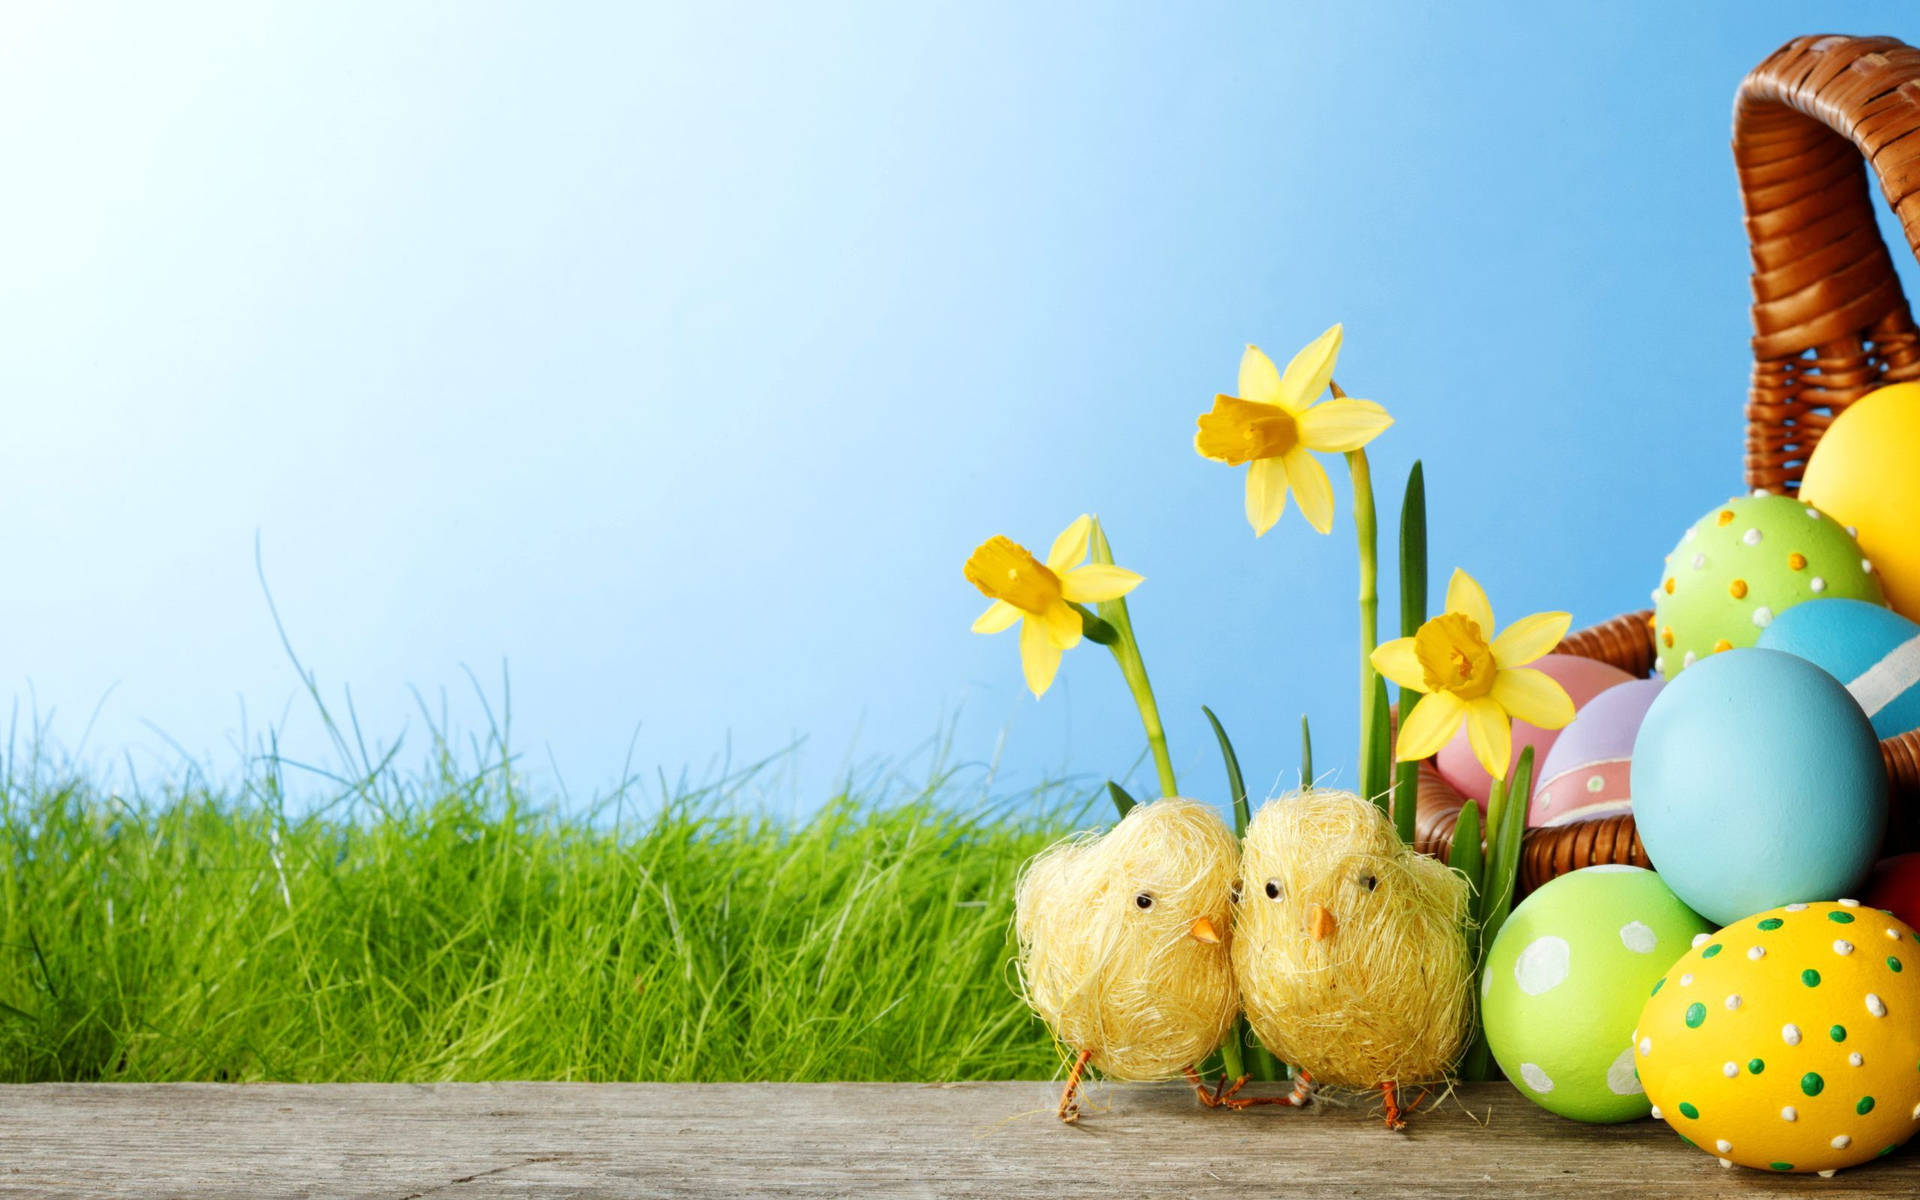 Celebrate Easter With Joyous Decorations Of Easter Eggs, Chicks, And Flowers Background